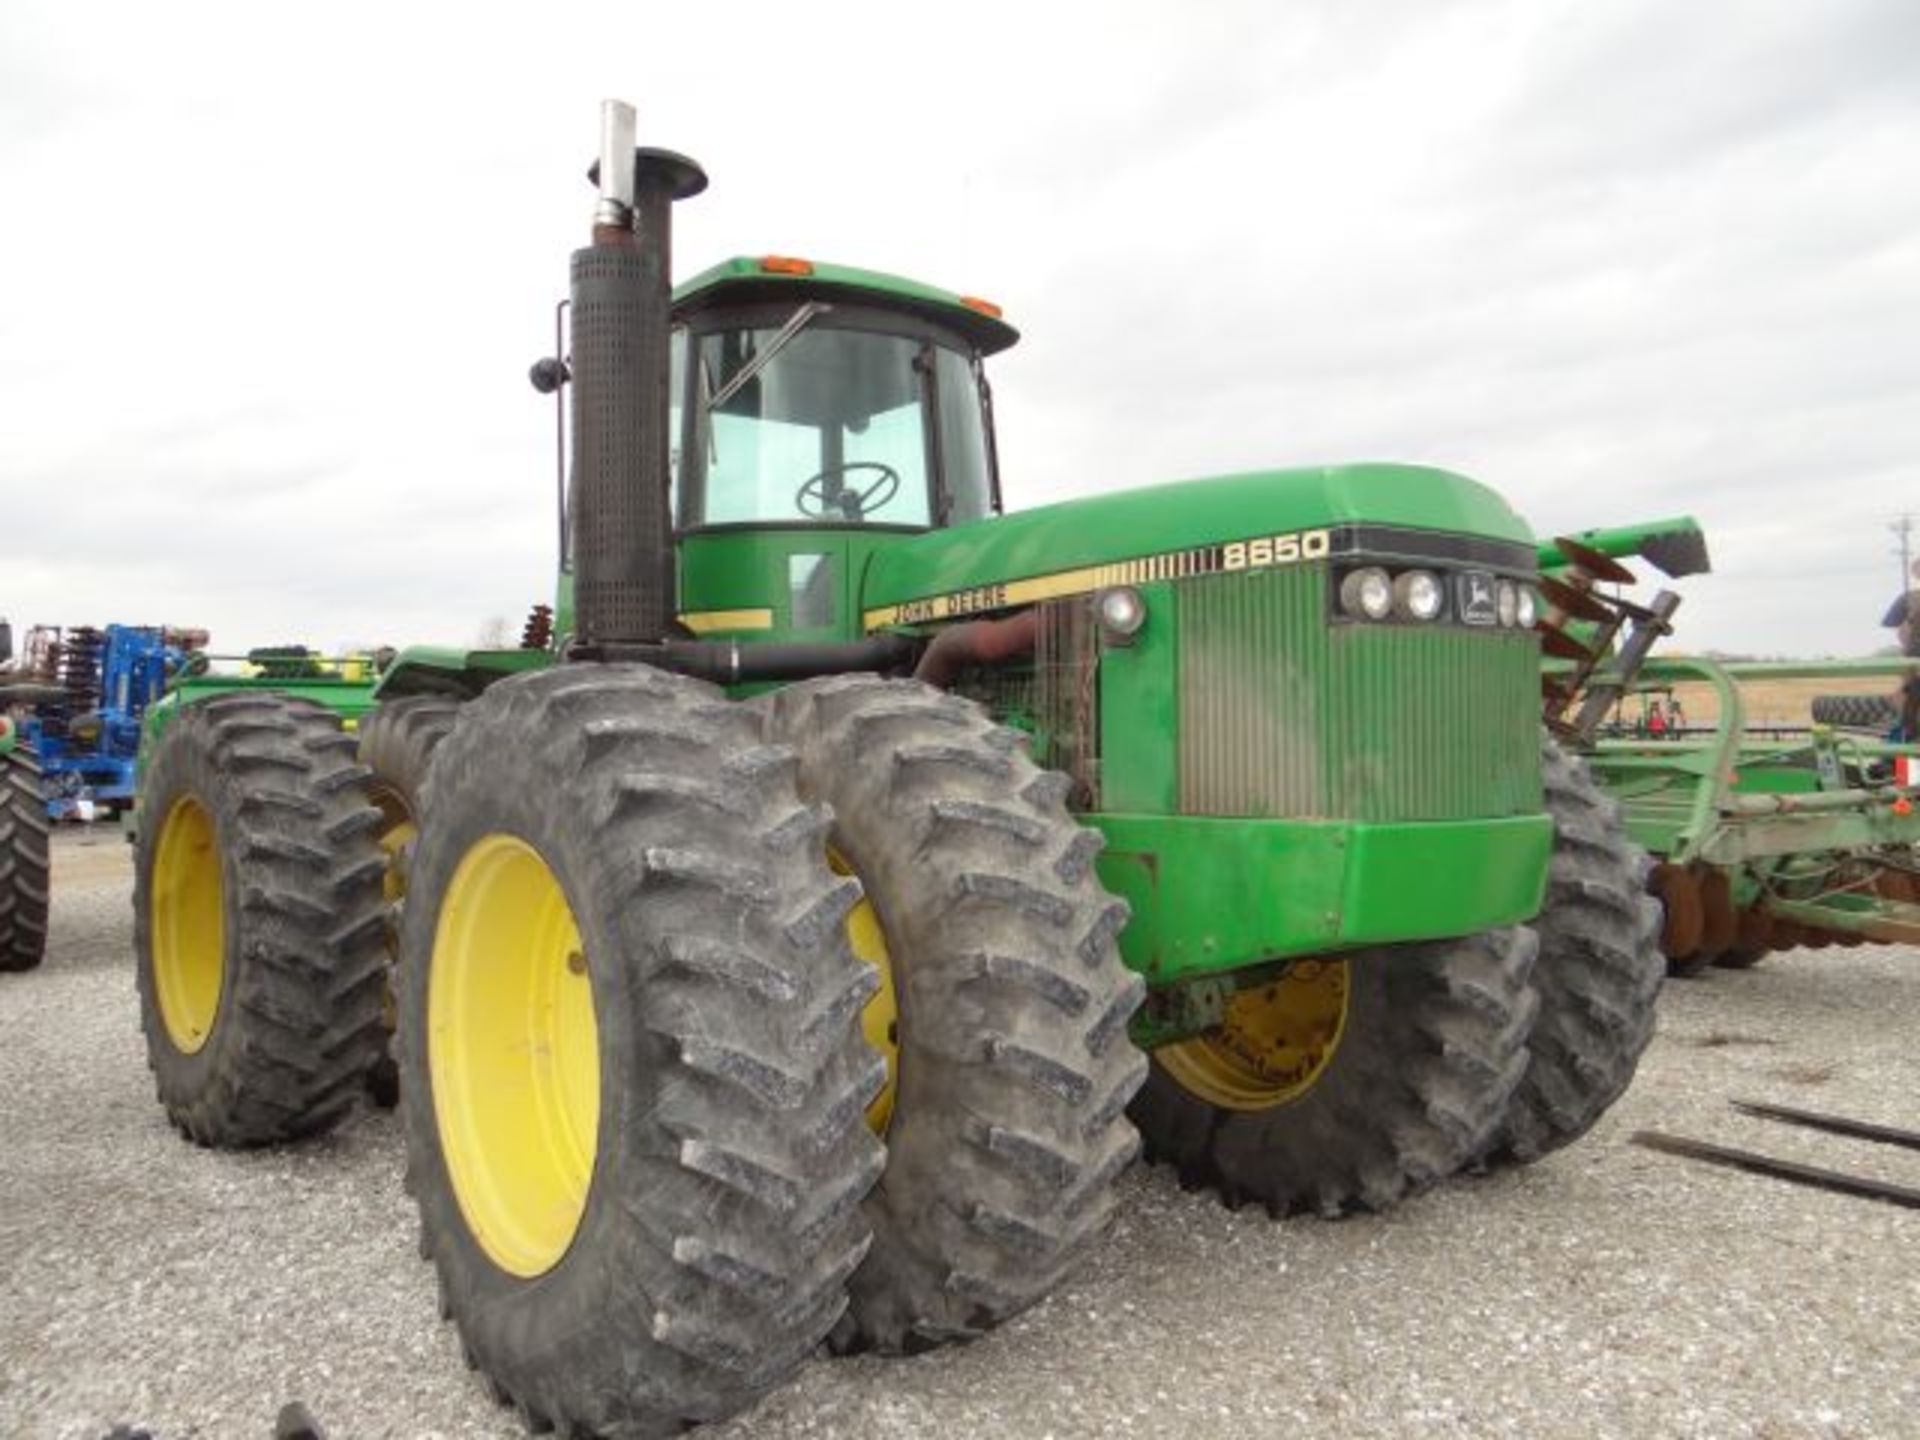 JD 8650 Tractor, 1982 #157562, 4wd, 3pt, Quick Hitch, Rear Pto, 4 Rear Scv, 20.8R-38 Tires Insides